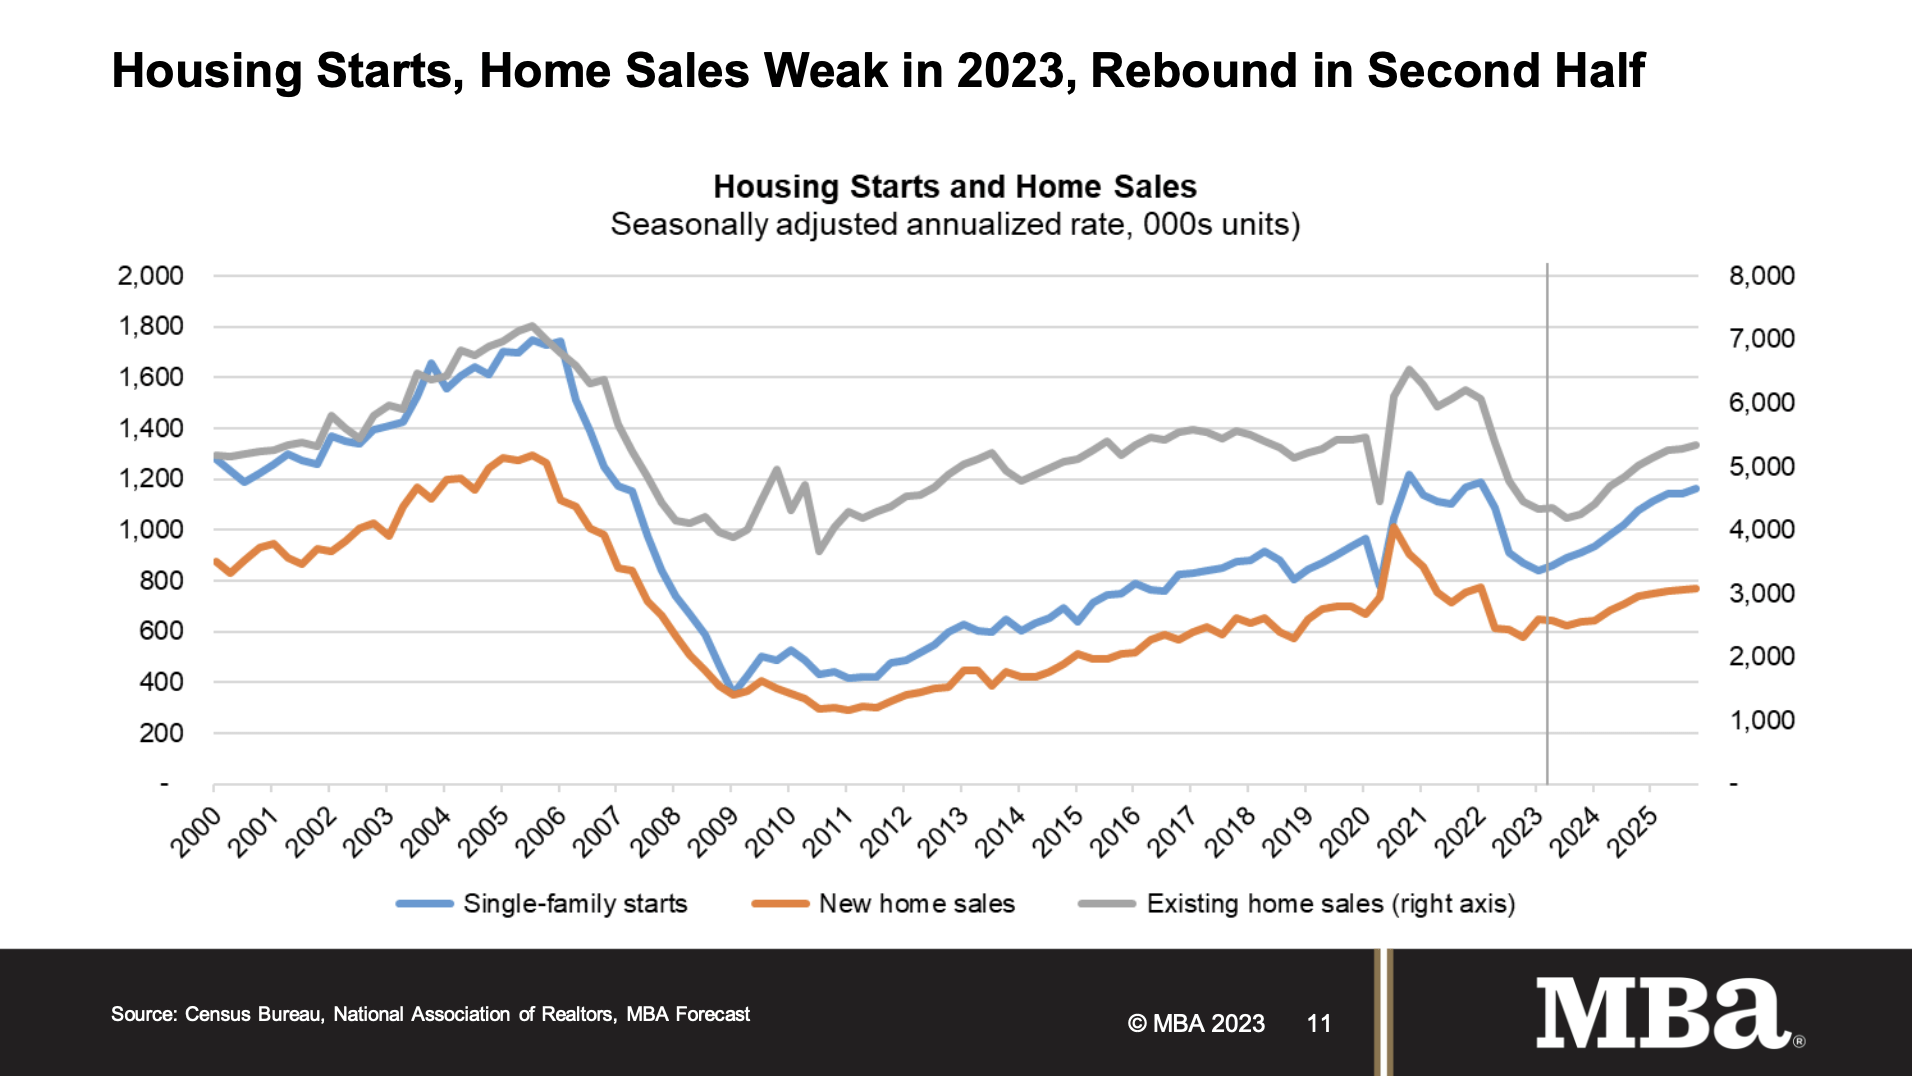 MBA predicts exiting home sales and new home sales will rebound in 2H23 and also in 2024 - The Basis Point